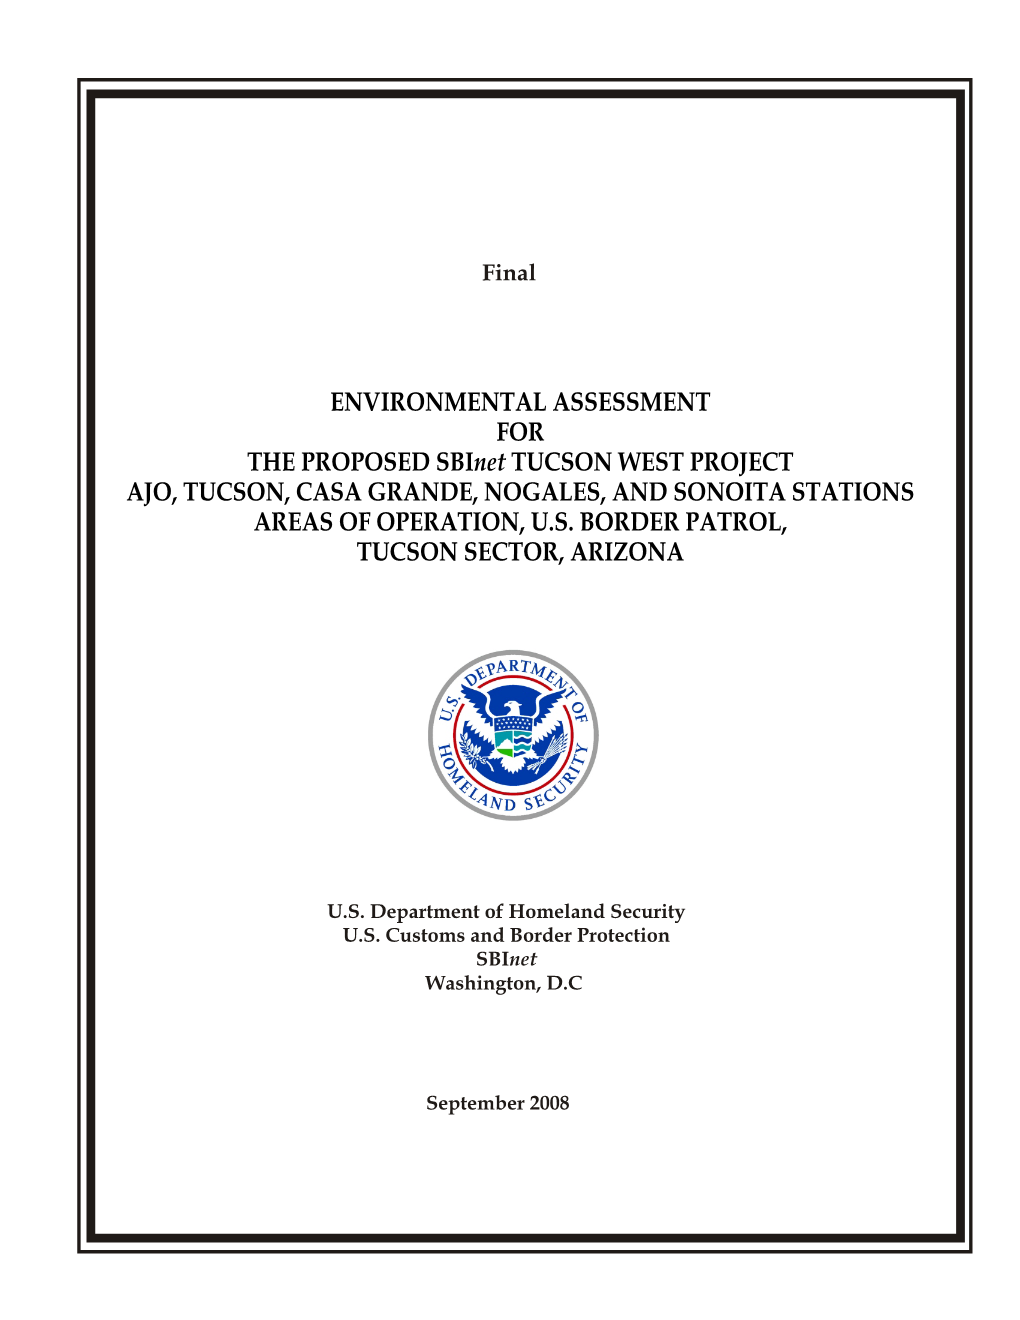 ENVIRONMENTAL ASSESSMENT for the PROPOSED Sbinet TUCSON WEST PROJECT AJO, TUCSON, CASA GRANDE, NOGALES, and SONOITA STATIONS AREAS of OPERATION, U.S